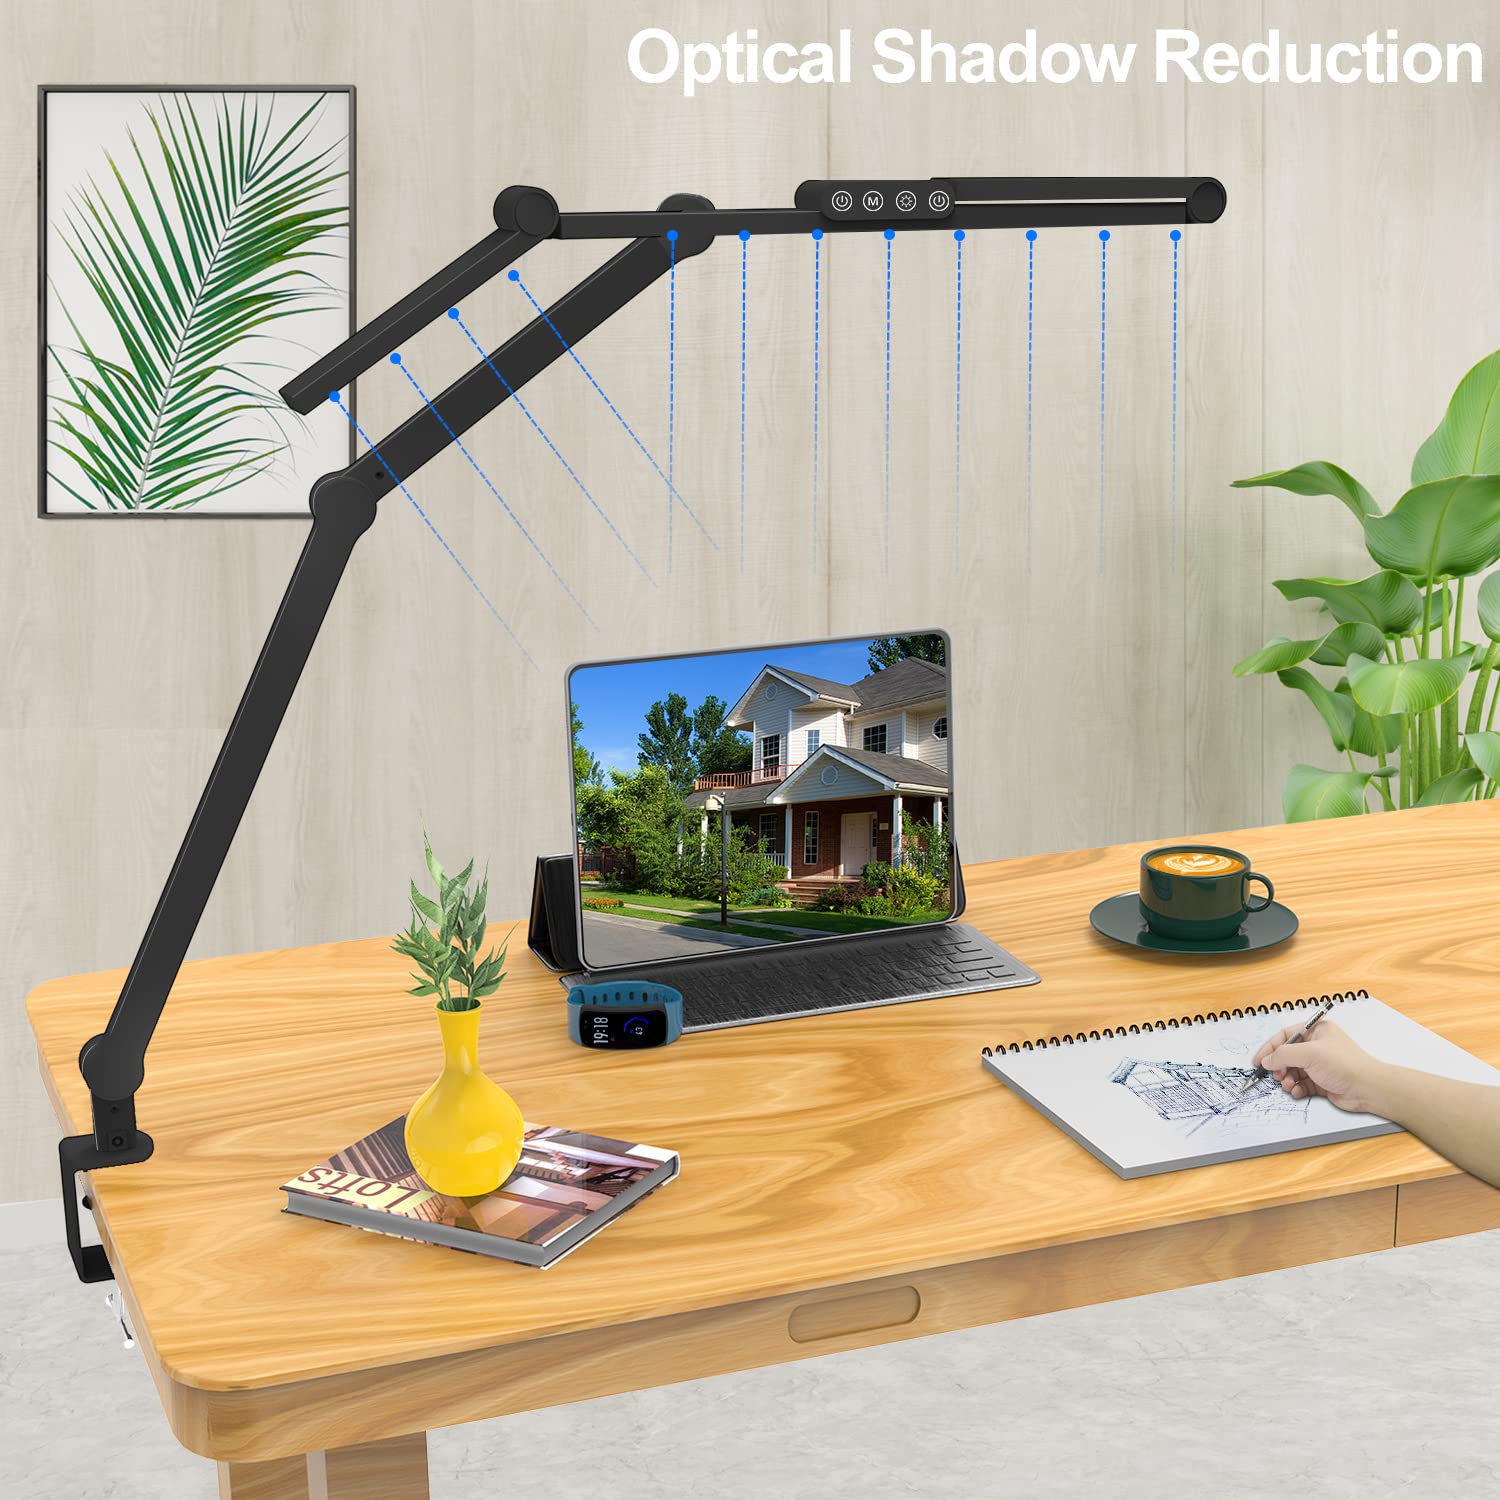 Micomlan Led Desk Lamp with Clamp, Architect Desk Lamp for Home Office with Atmosphere Lighting, 24W Ultra Bright Auto Dimming Desk Light Stepless Dimming and Tempering LED Table Light